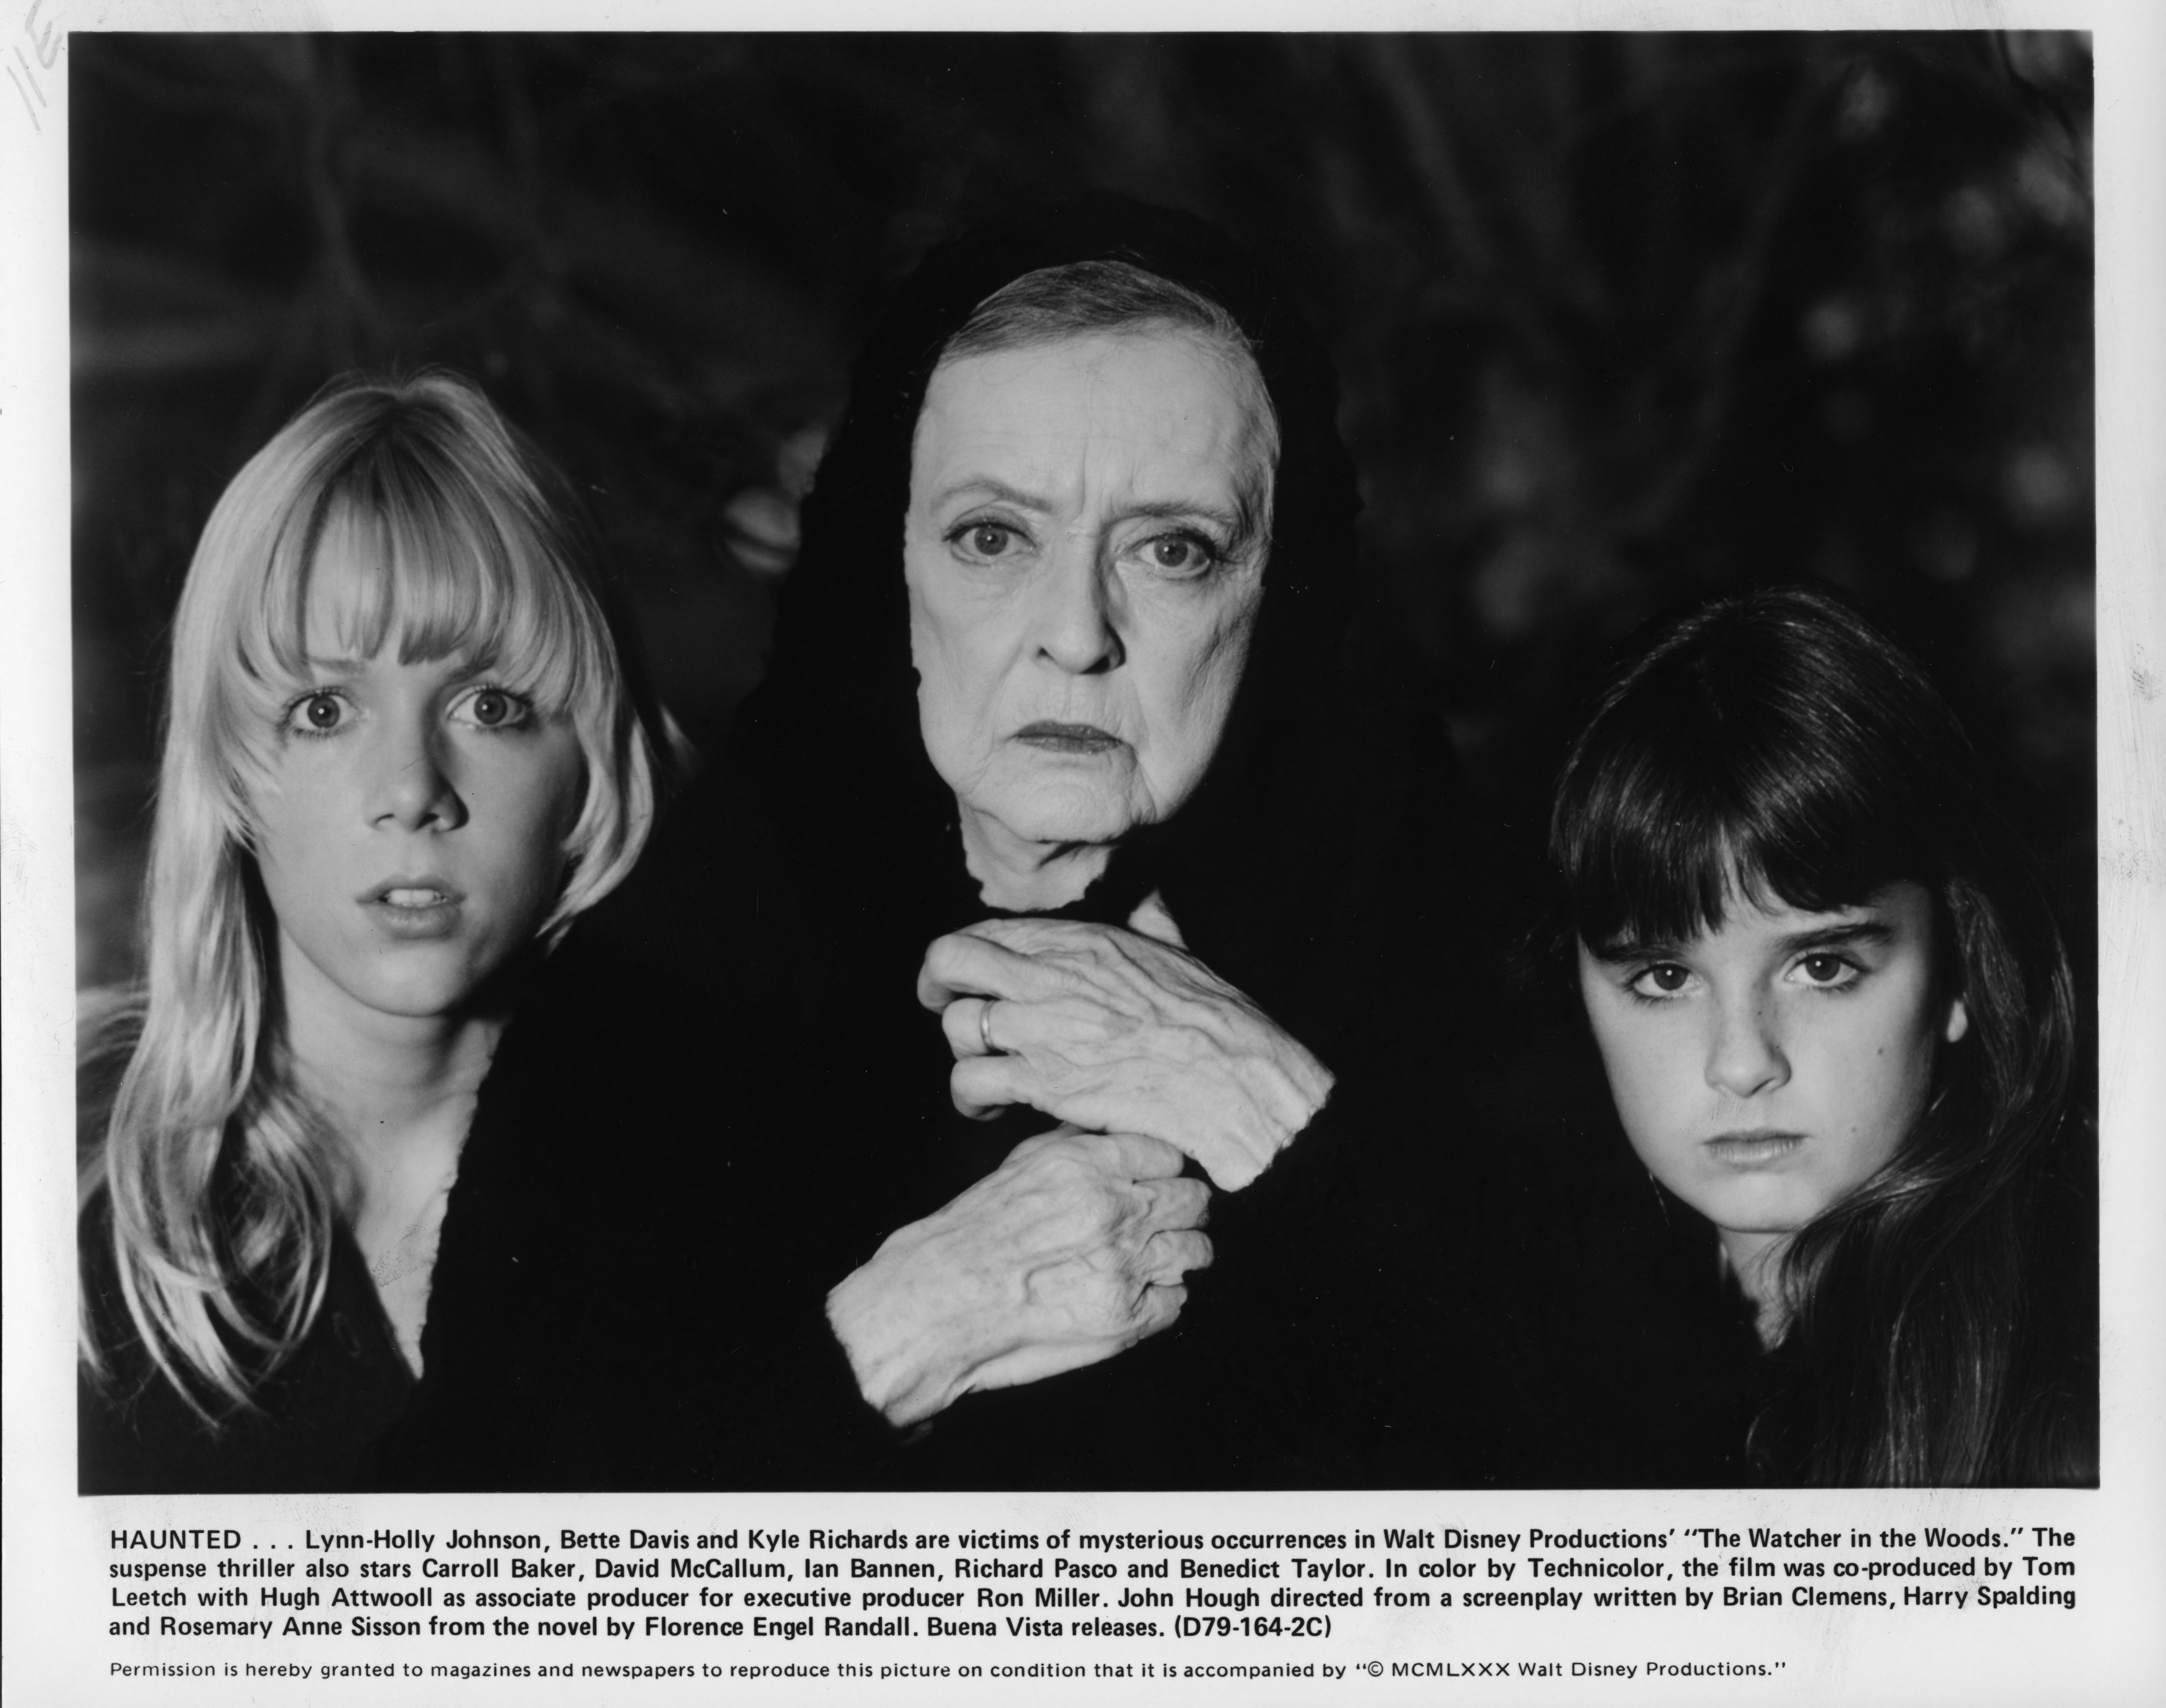 Lynn-Holly Johnson, Bette Davis, and Kyle Richards stare at the camera in a black and white still from 80s movie 'The Watcher in the Woods.'